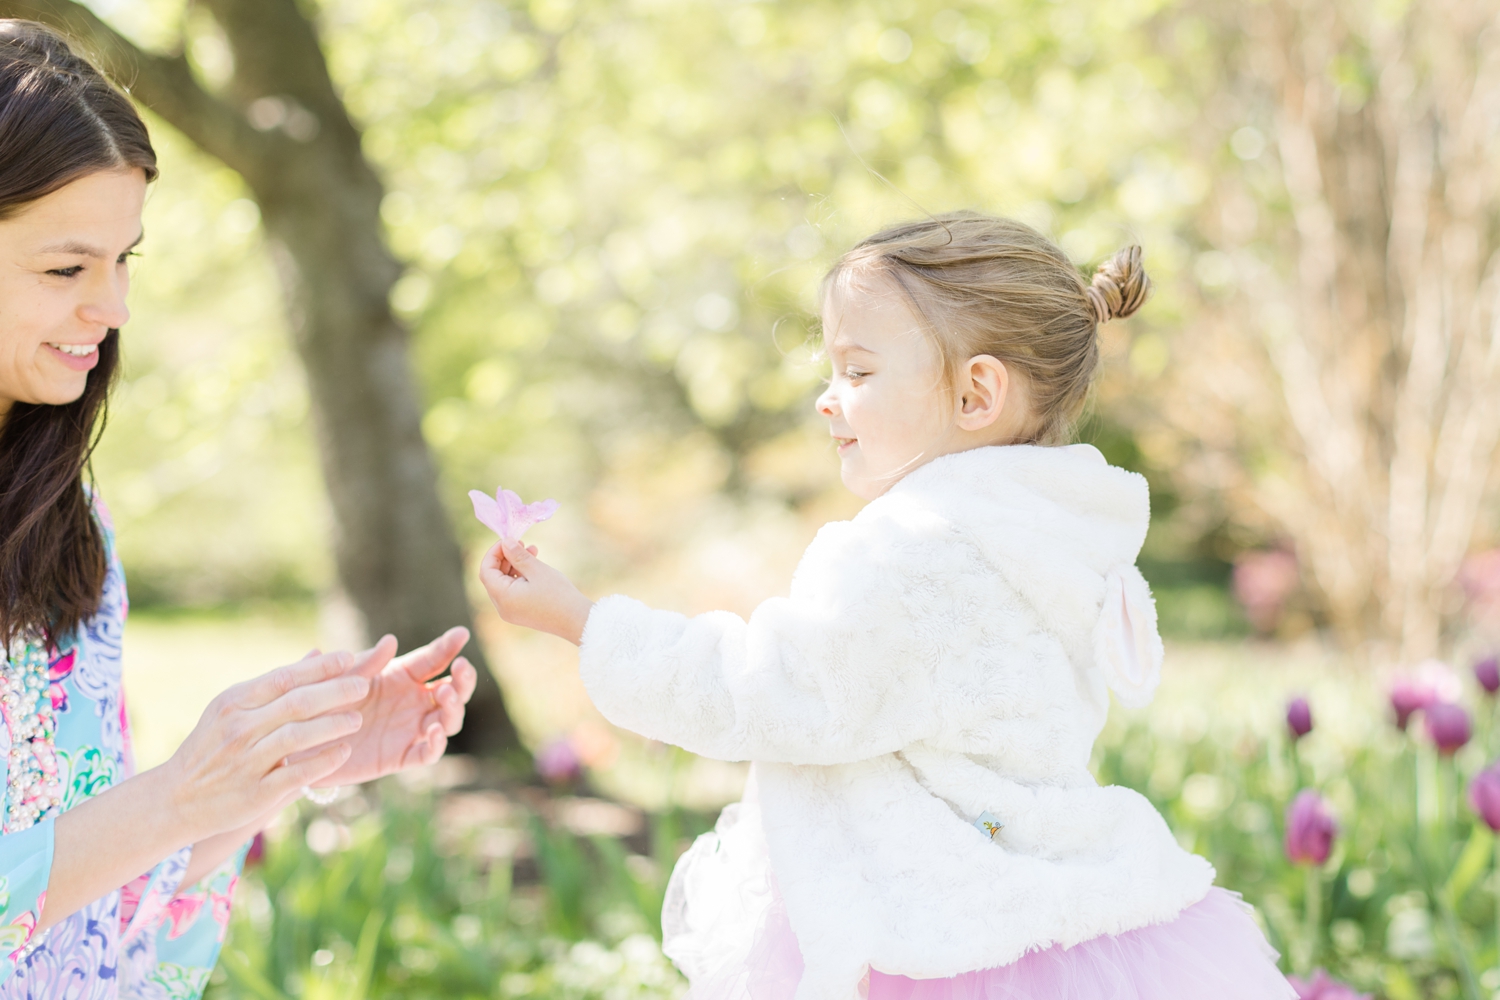  She found a flower for mom… so sweet! 